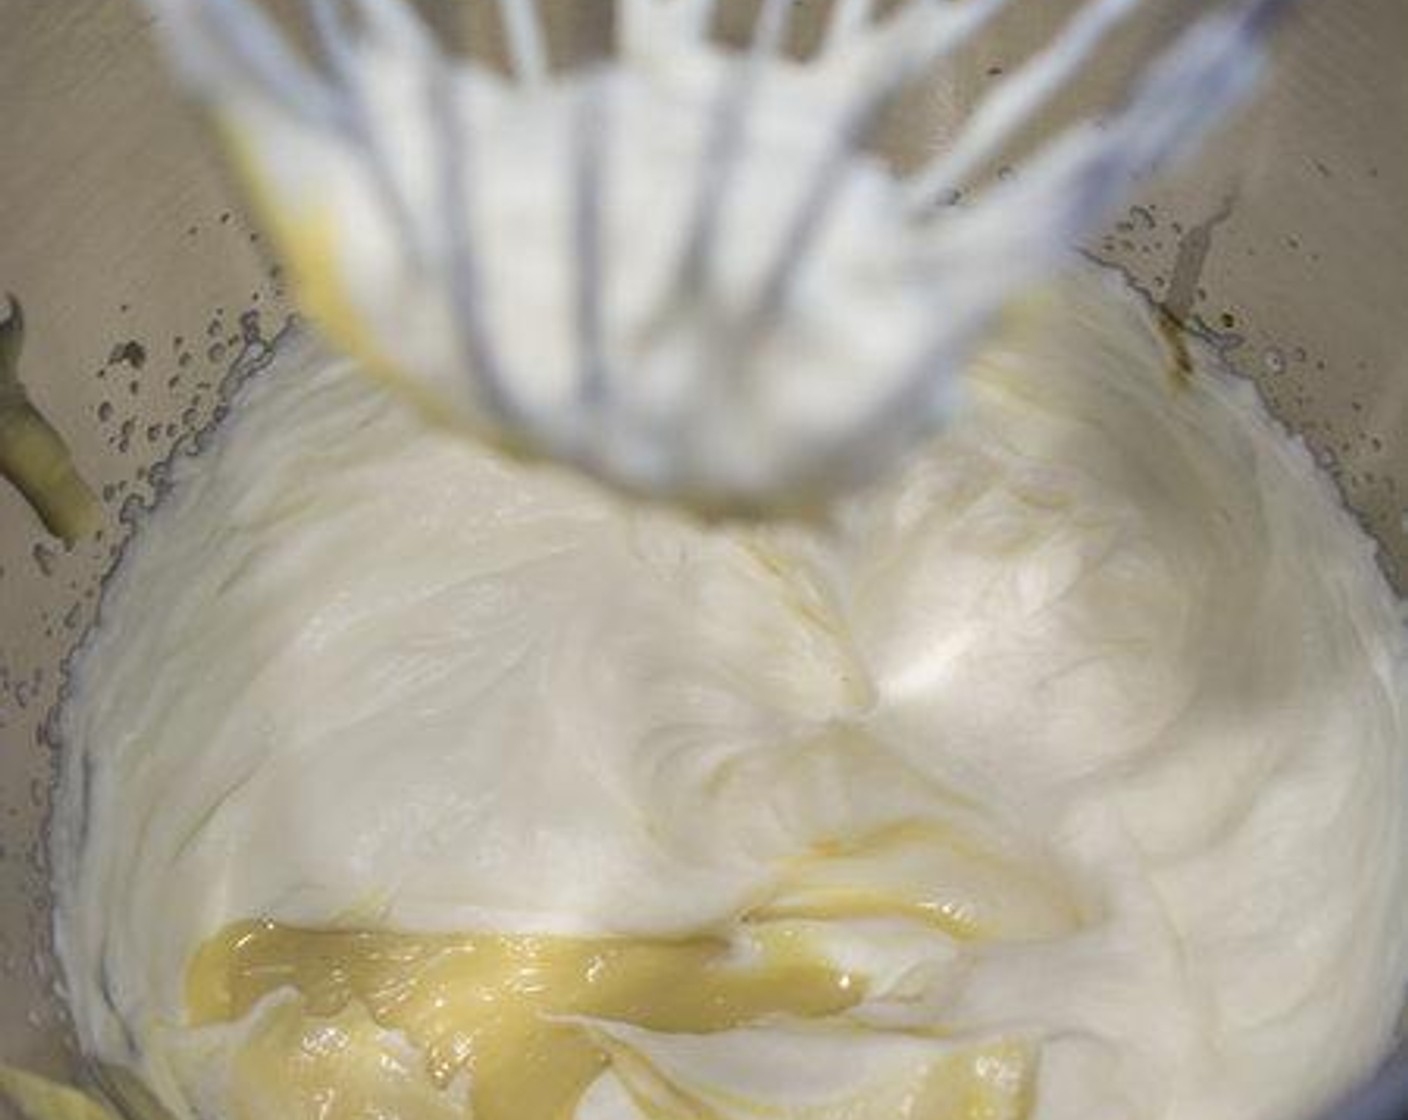 step 3 Whip up the Heavy Cream (1/2 cup) to stiff peaks.